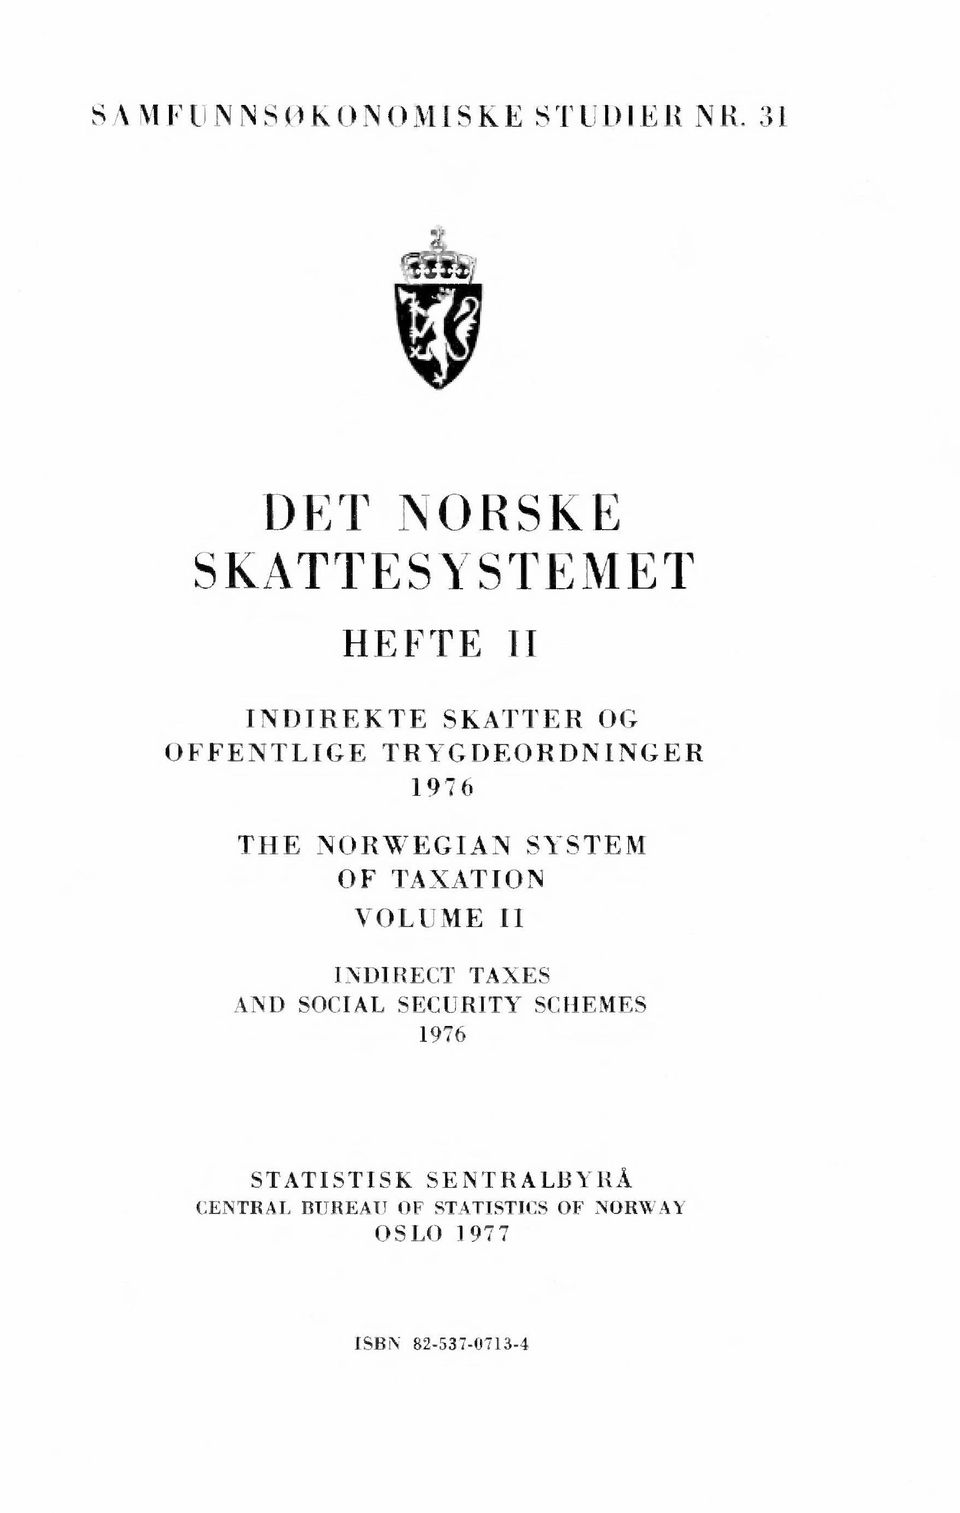 TRYGDEORDNINGER 1976 THE NORWEGIAN SYSTEM OF TAXATION VOLUME II INDIRECT